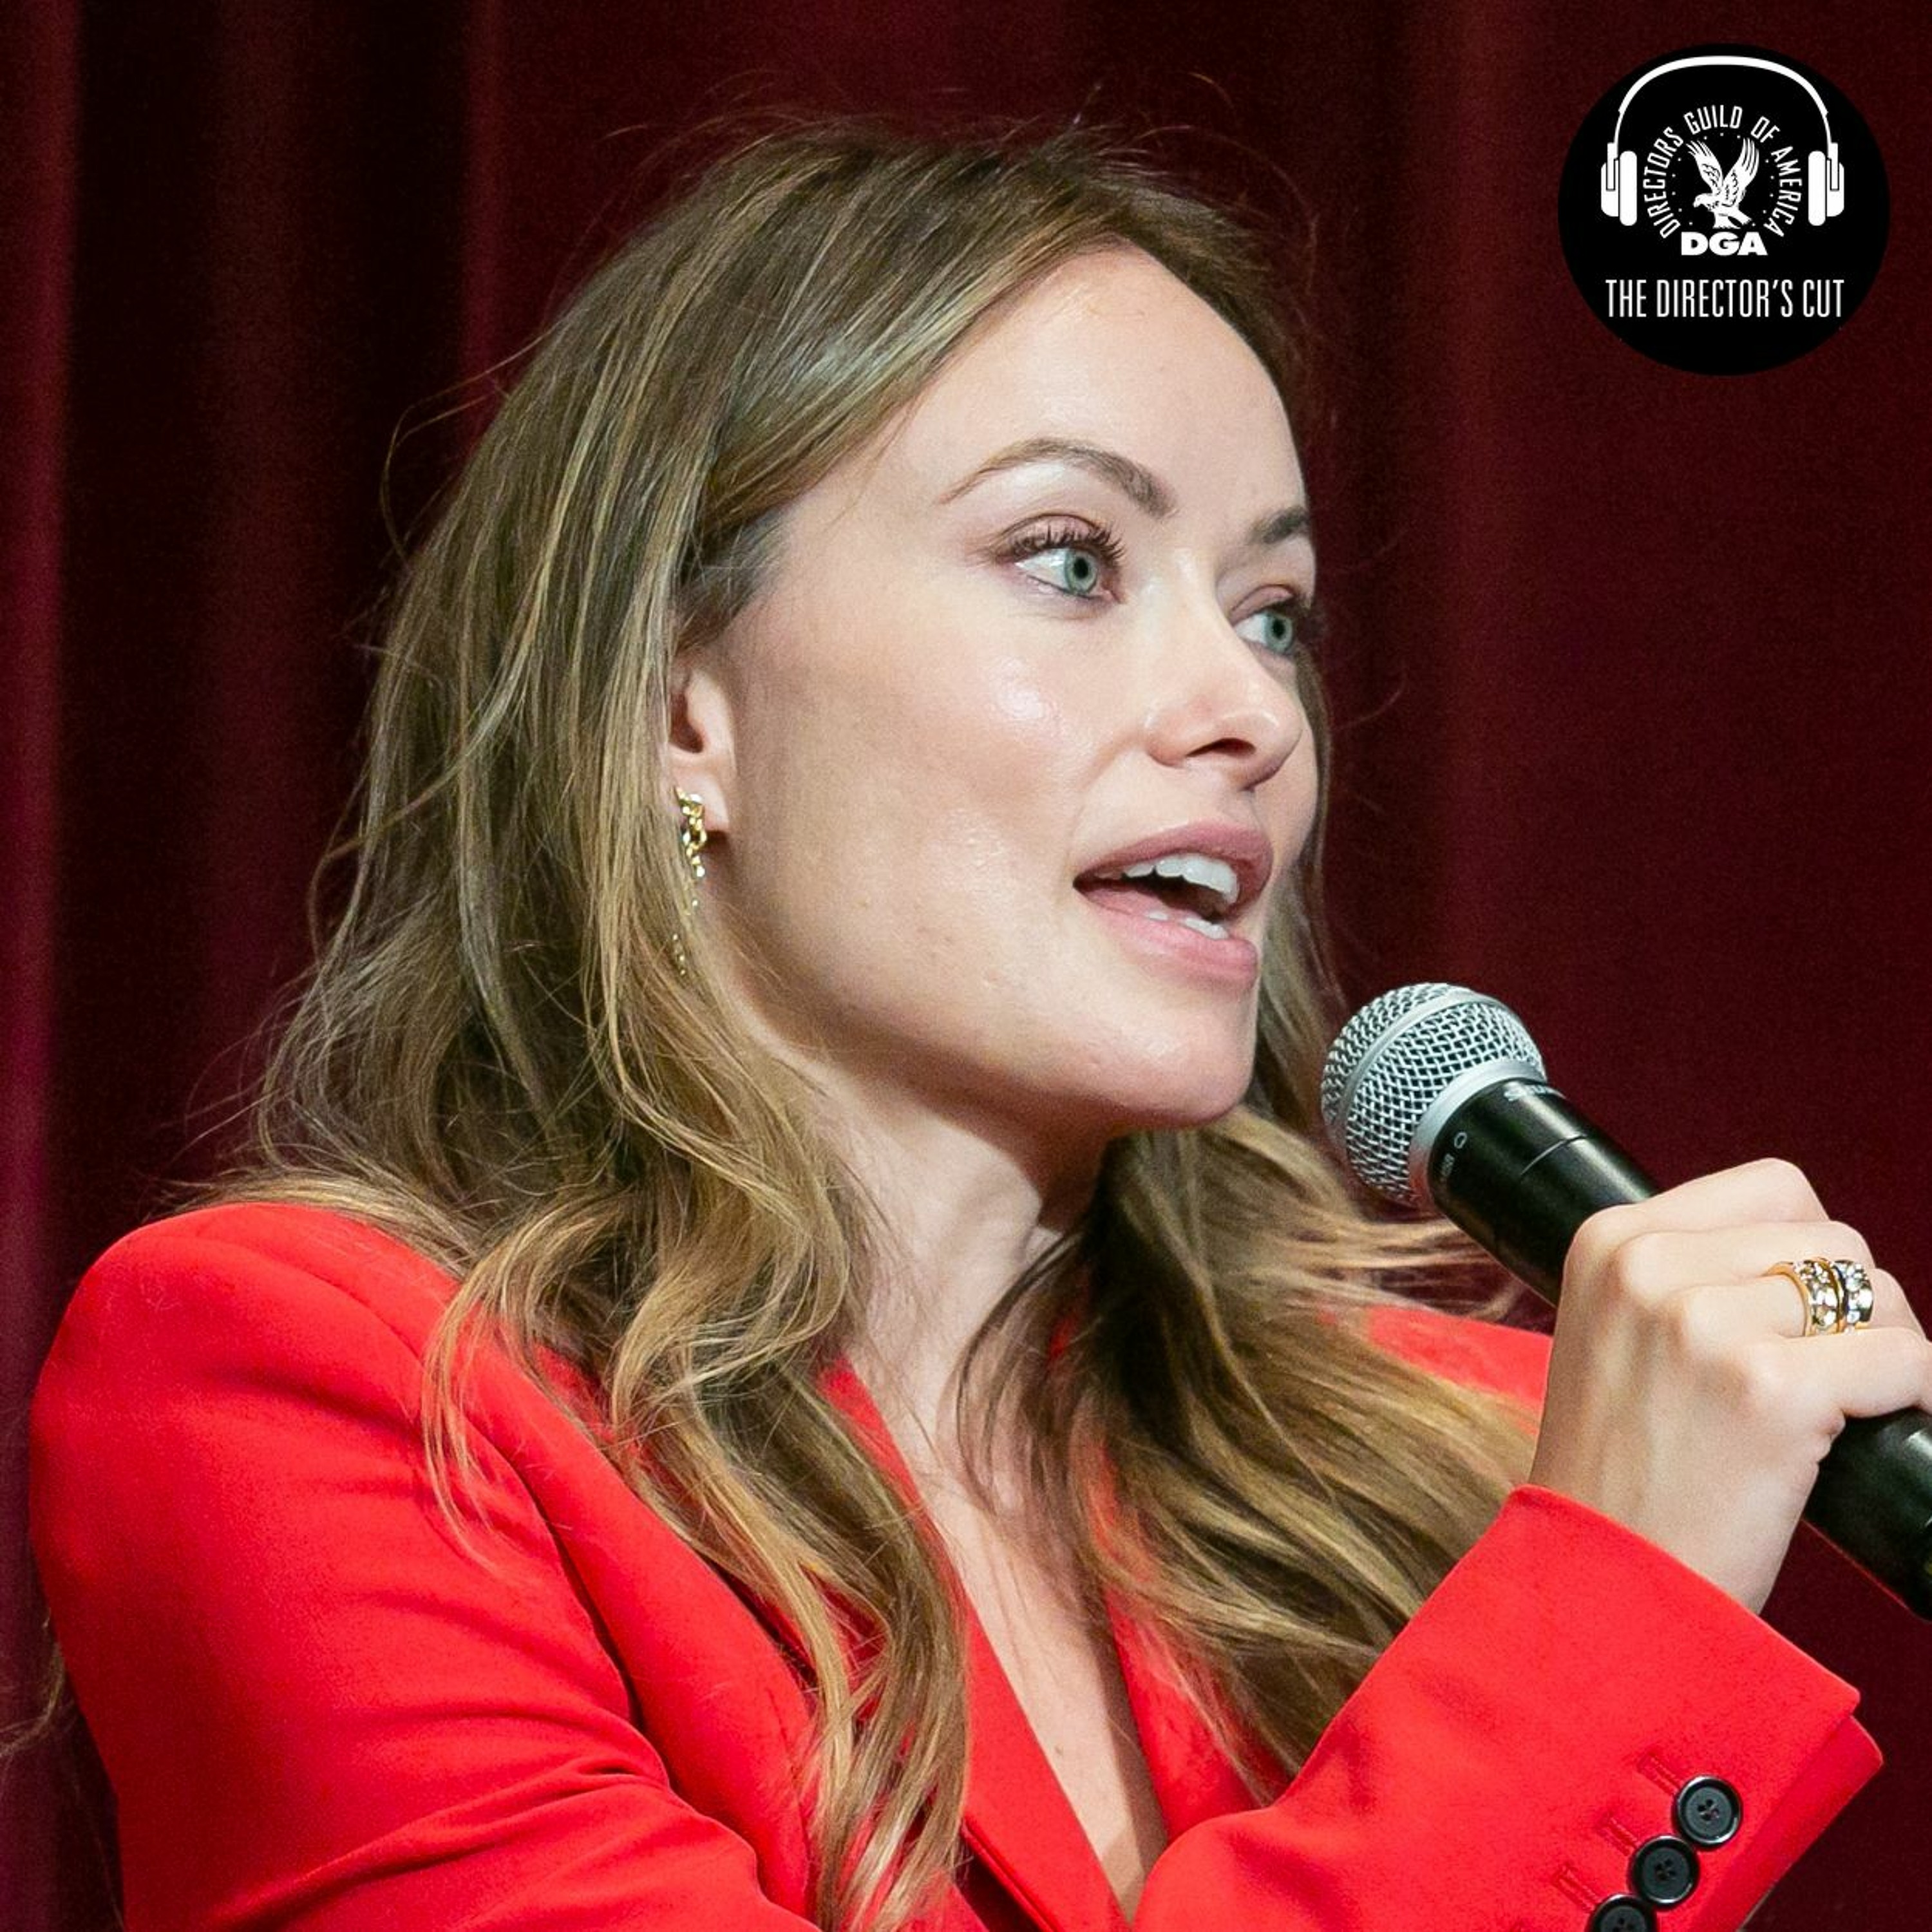 Don't Worry Darling with Olivia Wilde and Reed Morano (Ep. 373)